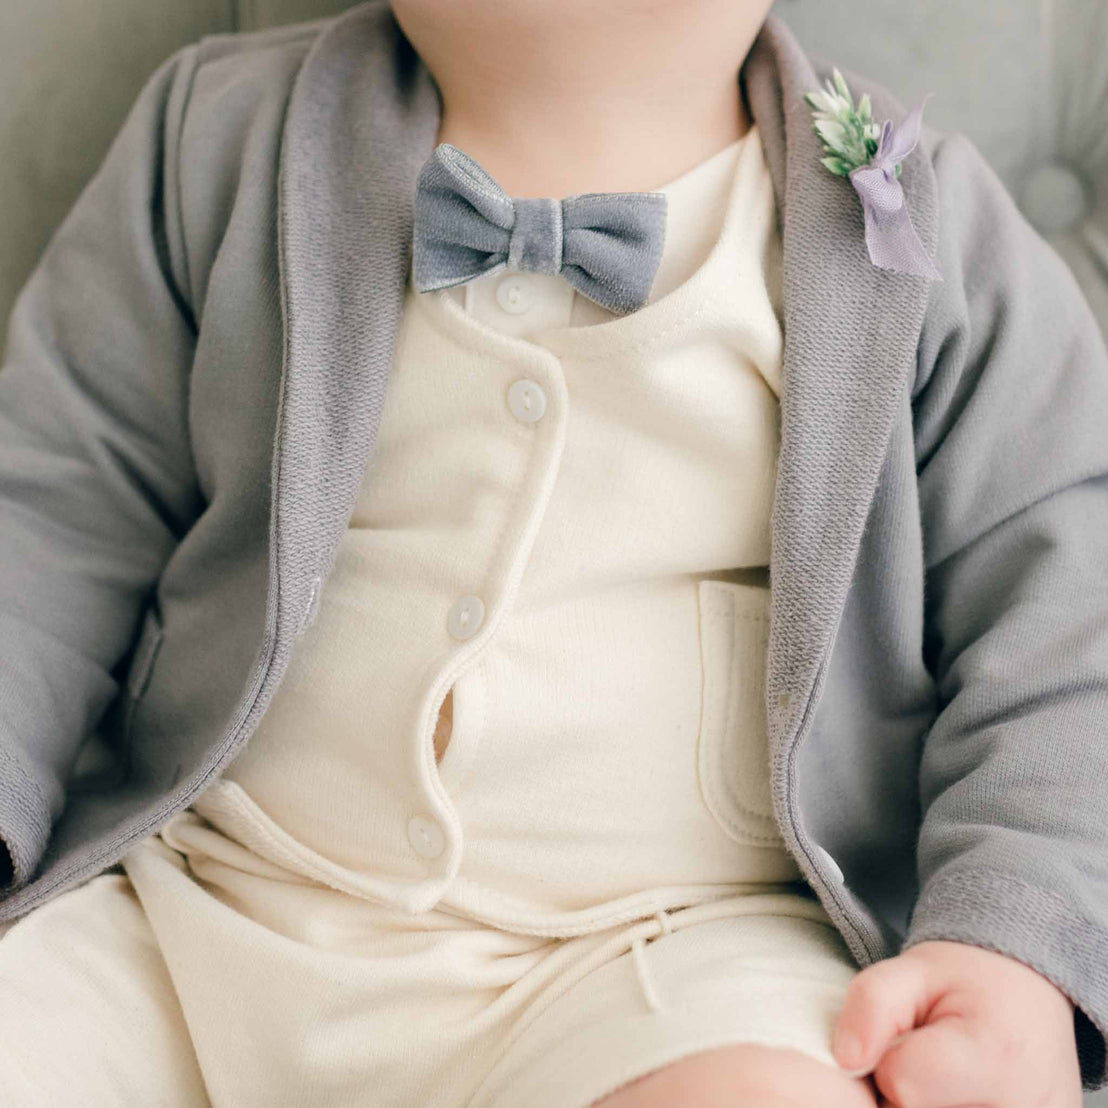 Baby boy wearing the Ezra French Terry Jacket with attached velvet bow tie and boutonniere